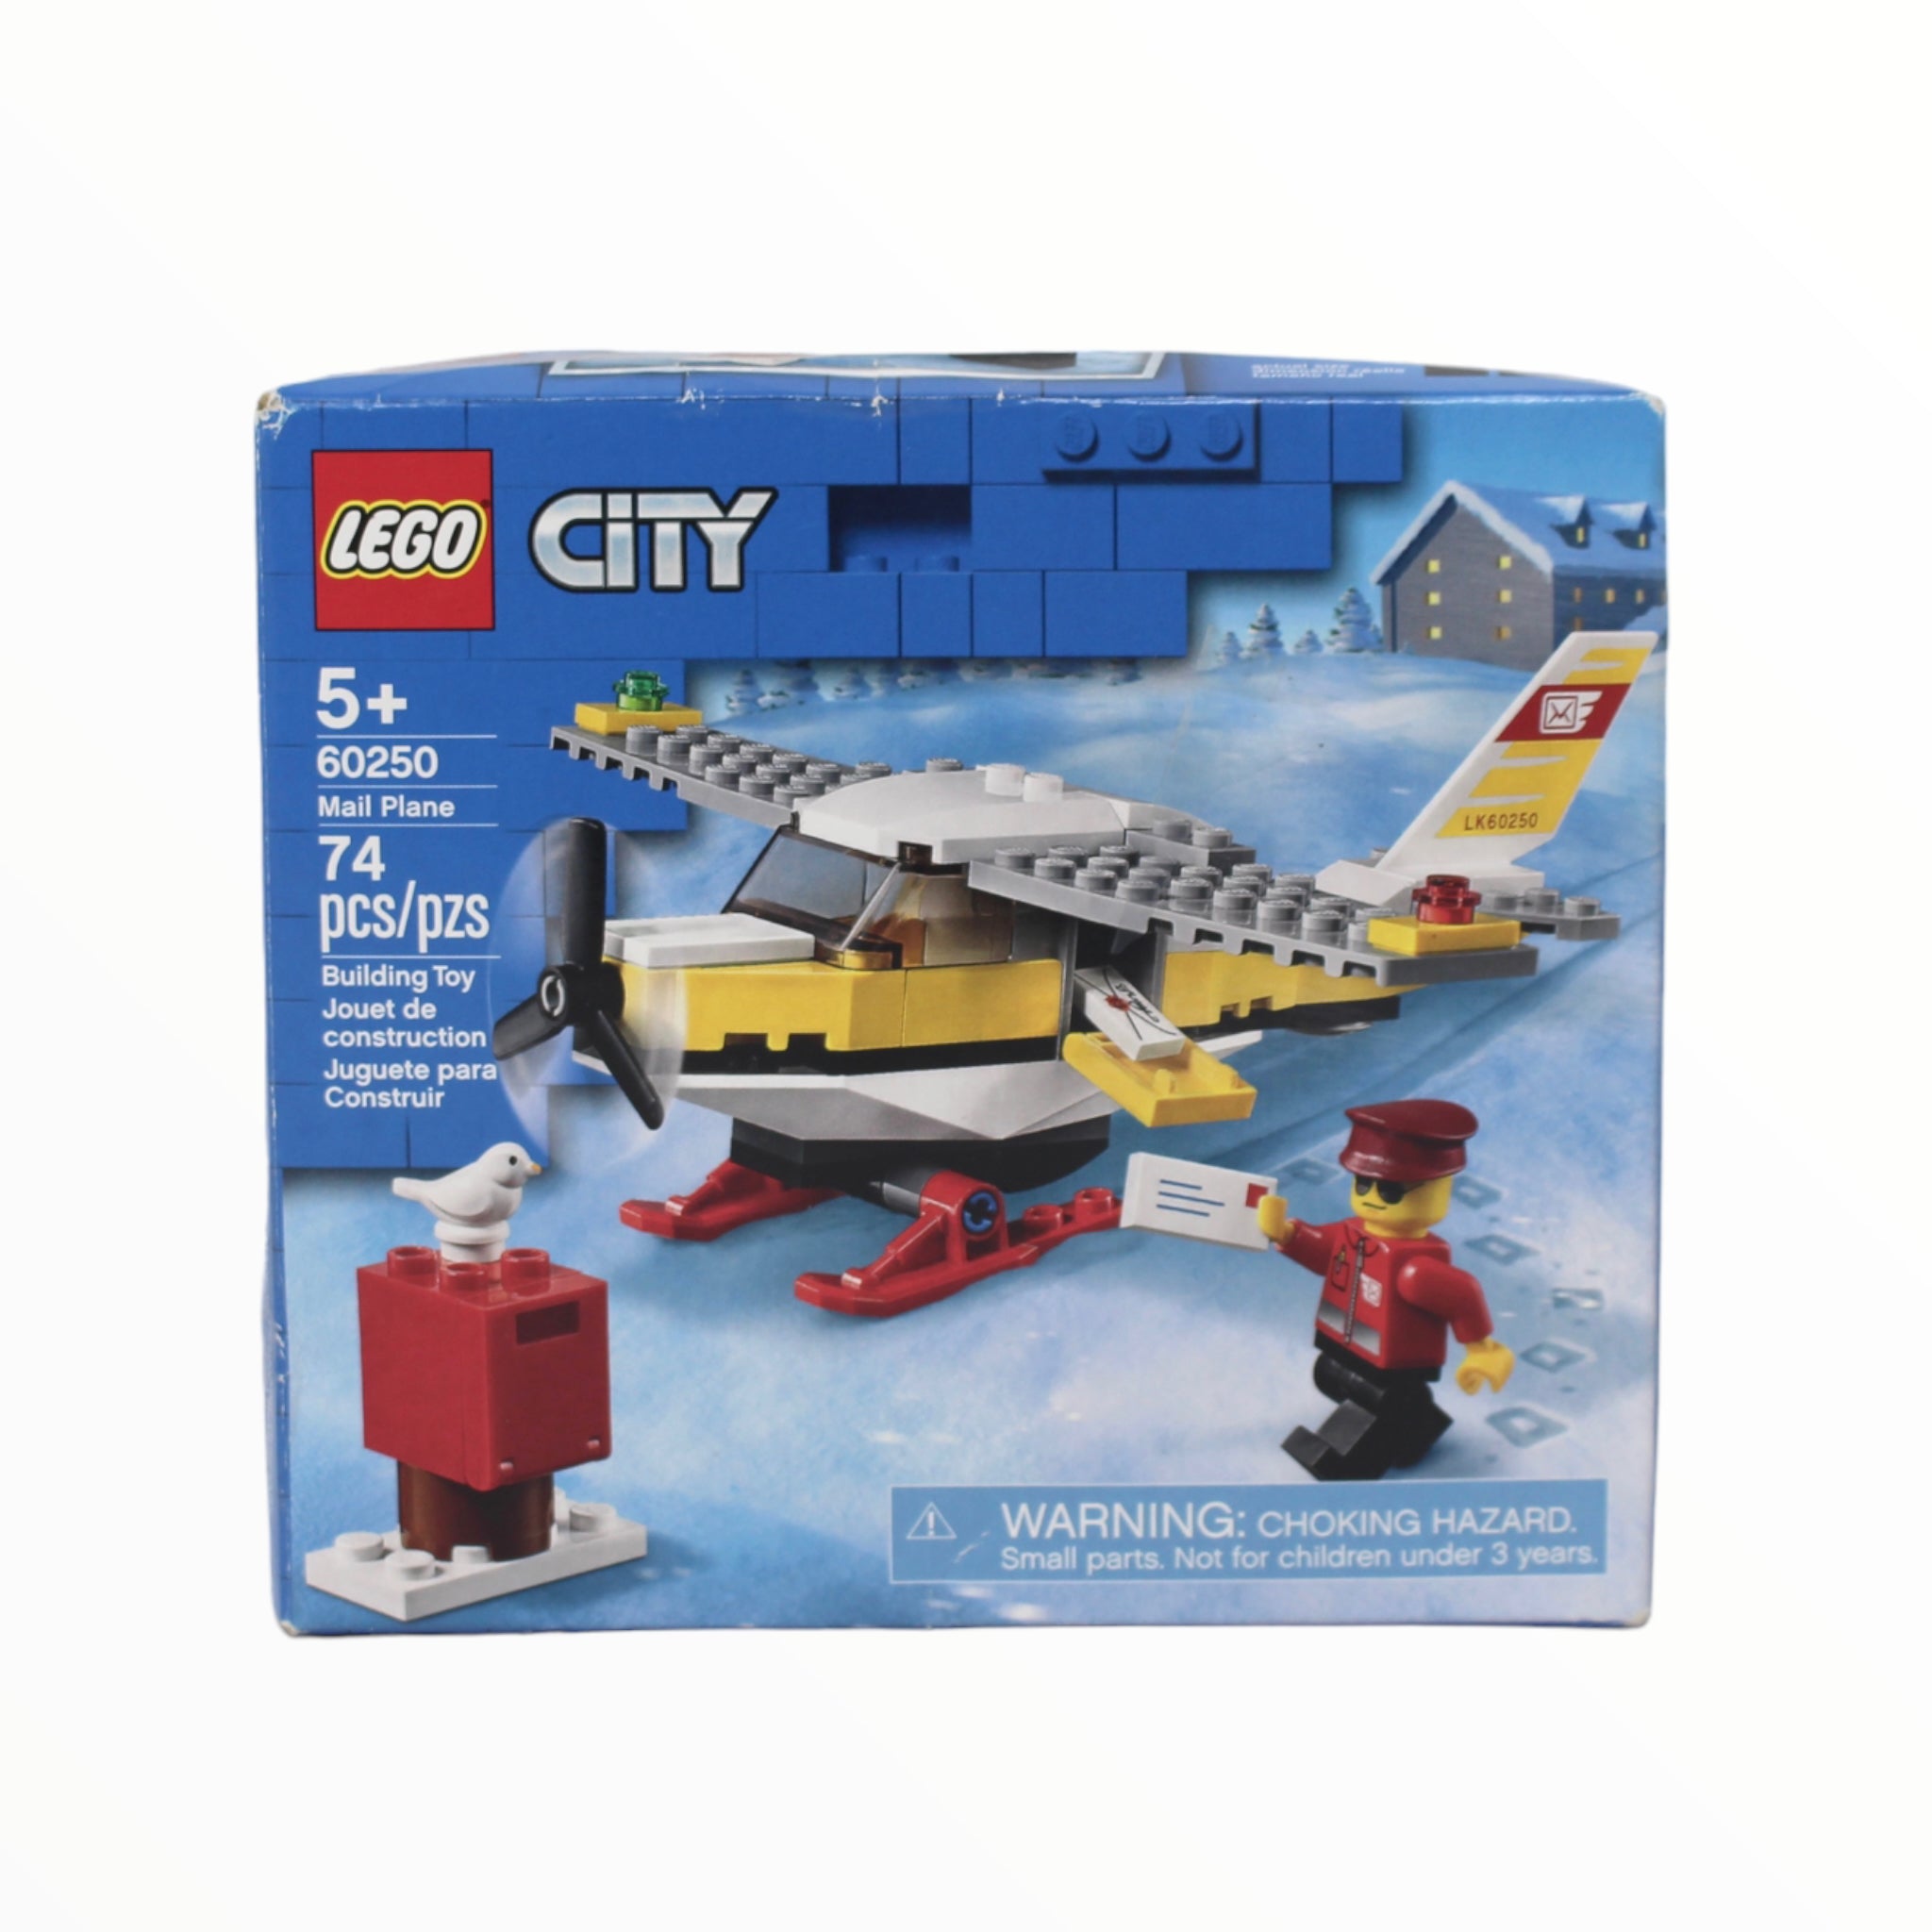 Certified Used Set 60250 City Mail Plane